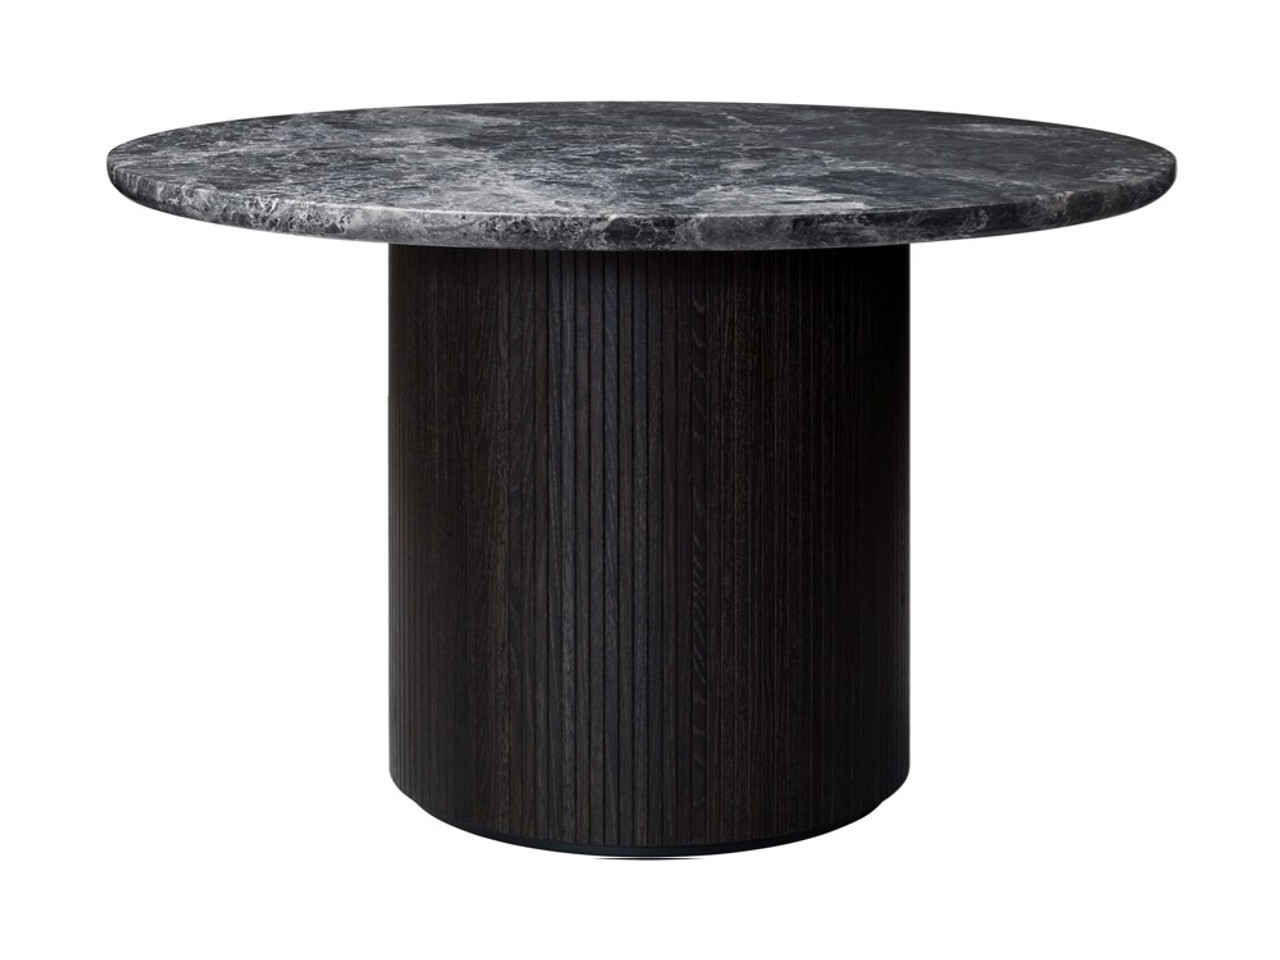 Gubi Moon Round Dining Table by Space Copenhagen